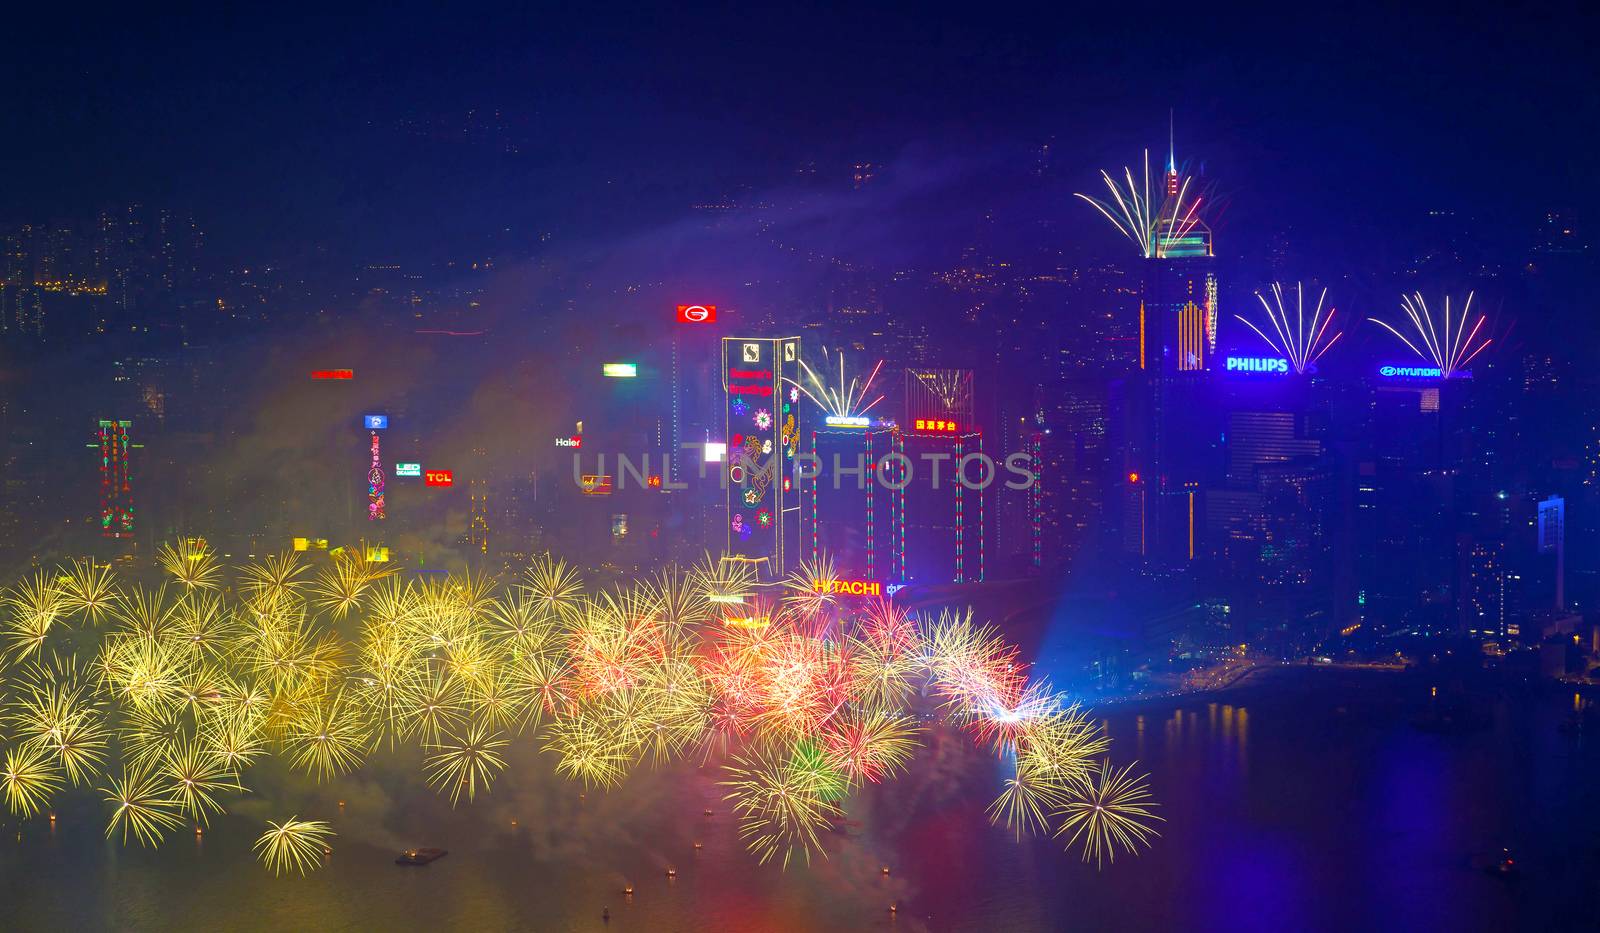 HONG KONG - JANUARY 1: A splendid firework show and countdown celebration held in Hong Kong on January 1, 2014. The show lasted for 8 minutes and lighted up the skies above Hong Kong skyscrapers.